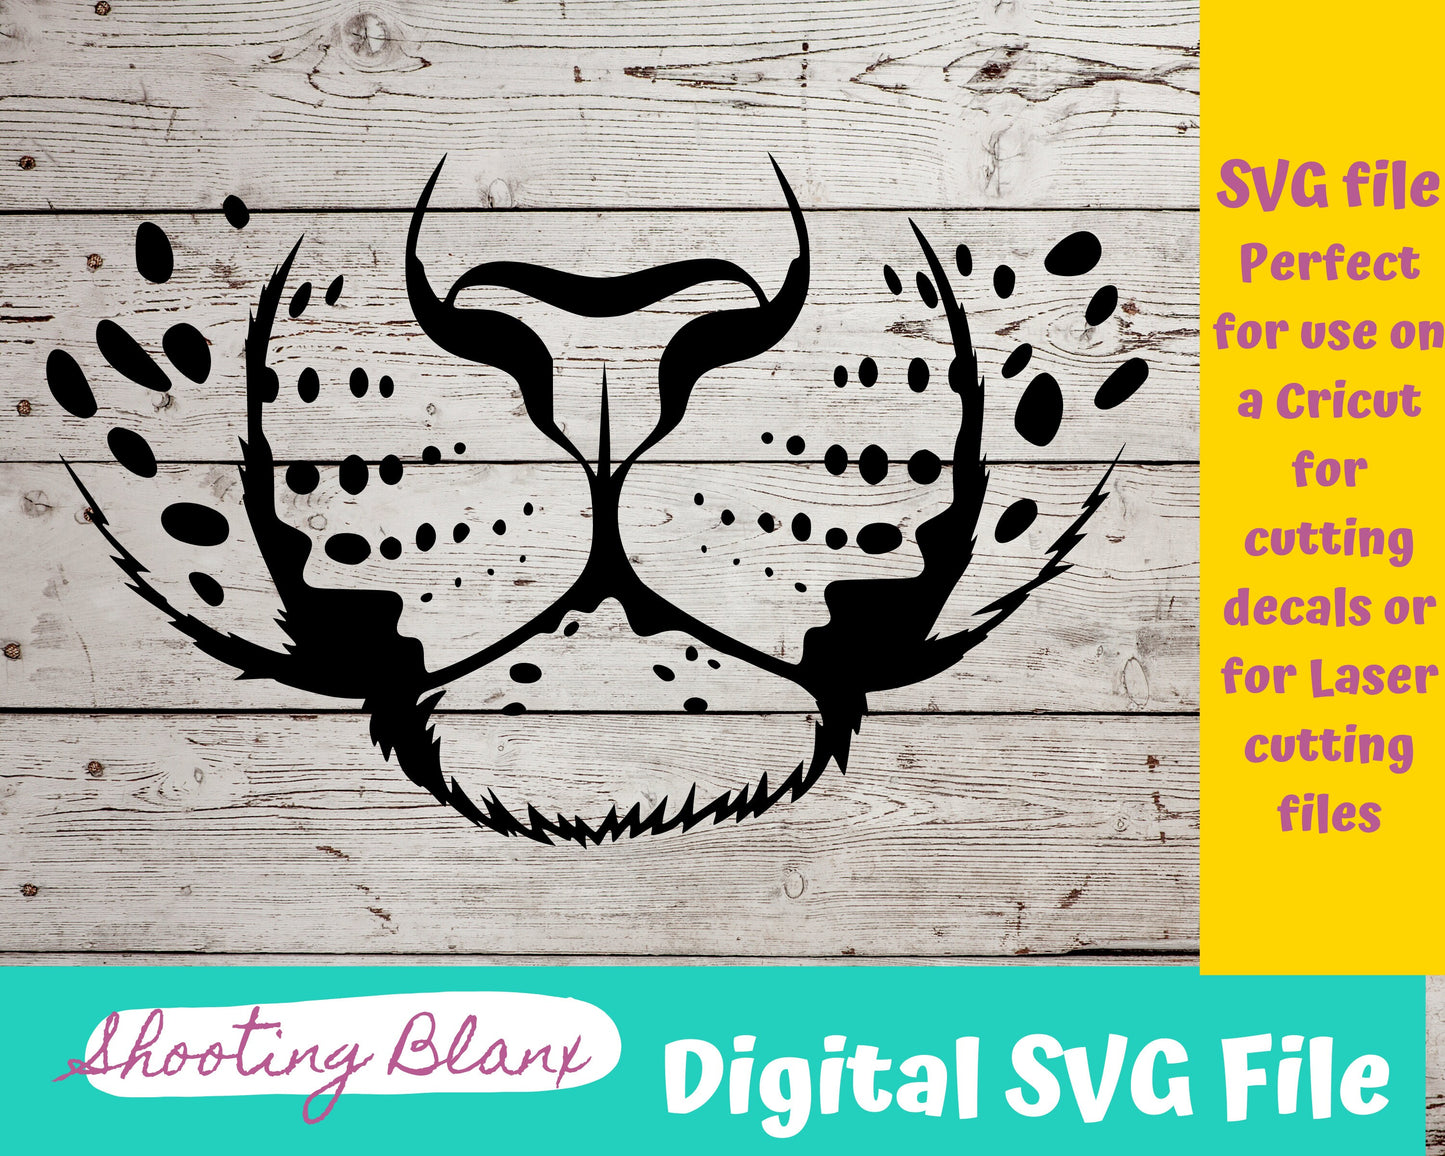 Bull Dog  Mouth SVG file perfect for Cricut, Cameo, or Silhouette also for laser engraving Glowforge, half face, mask, sublimation